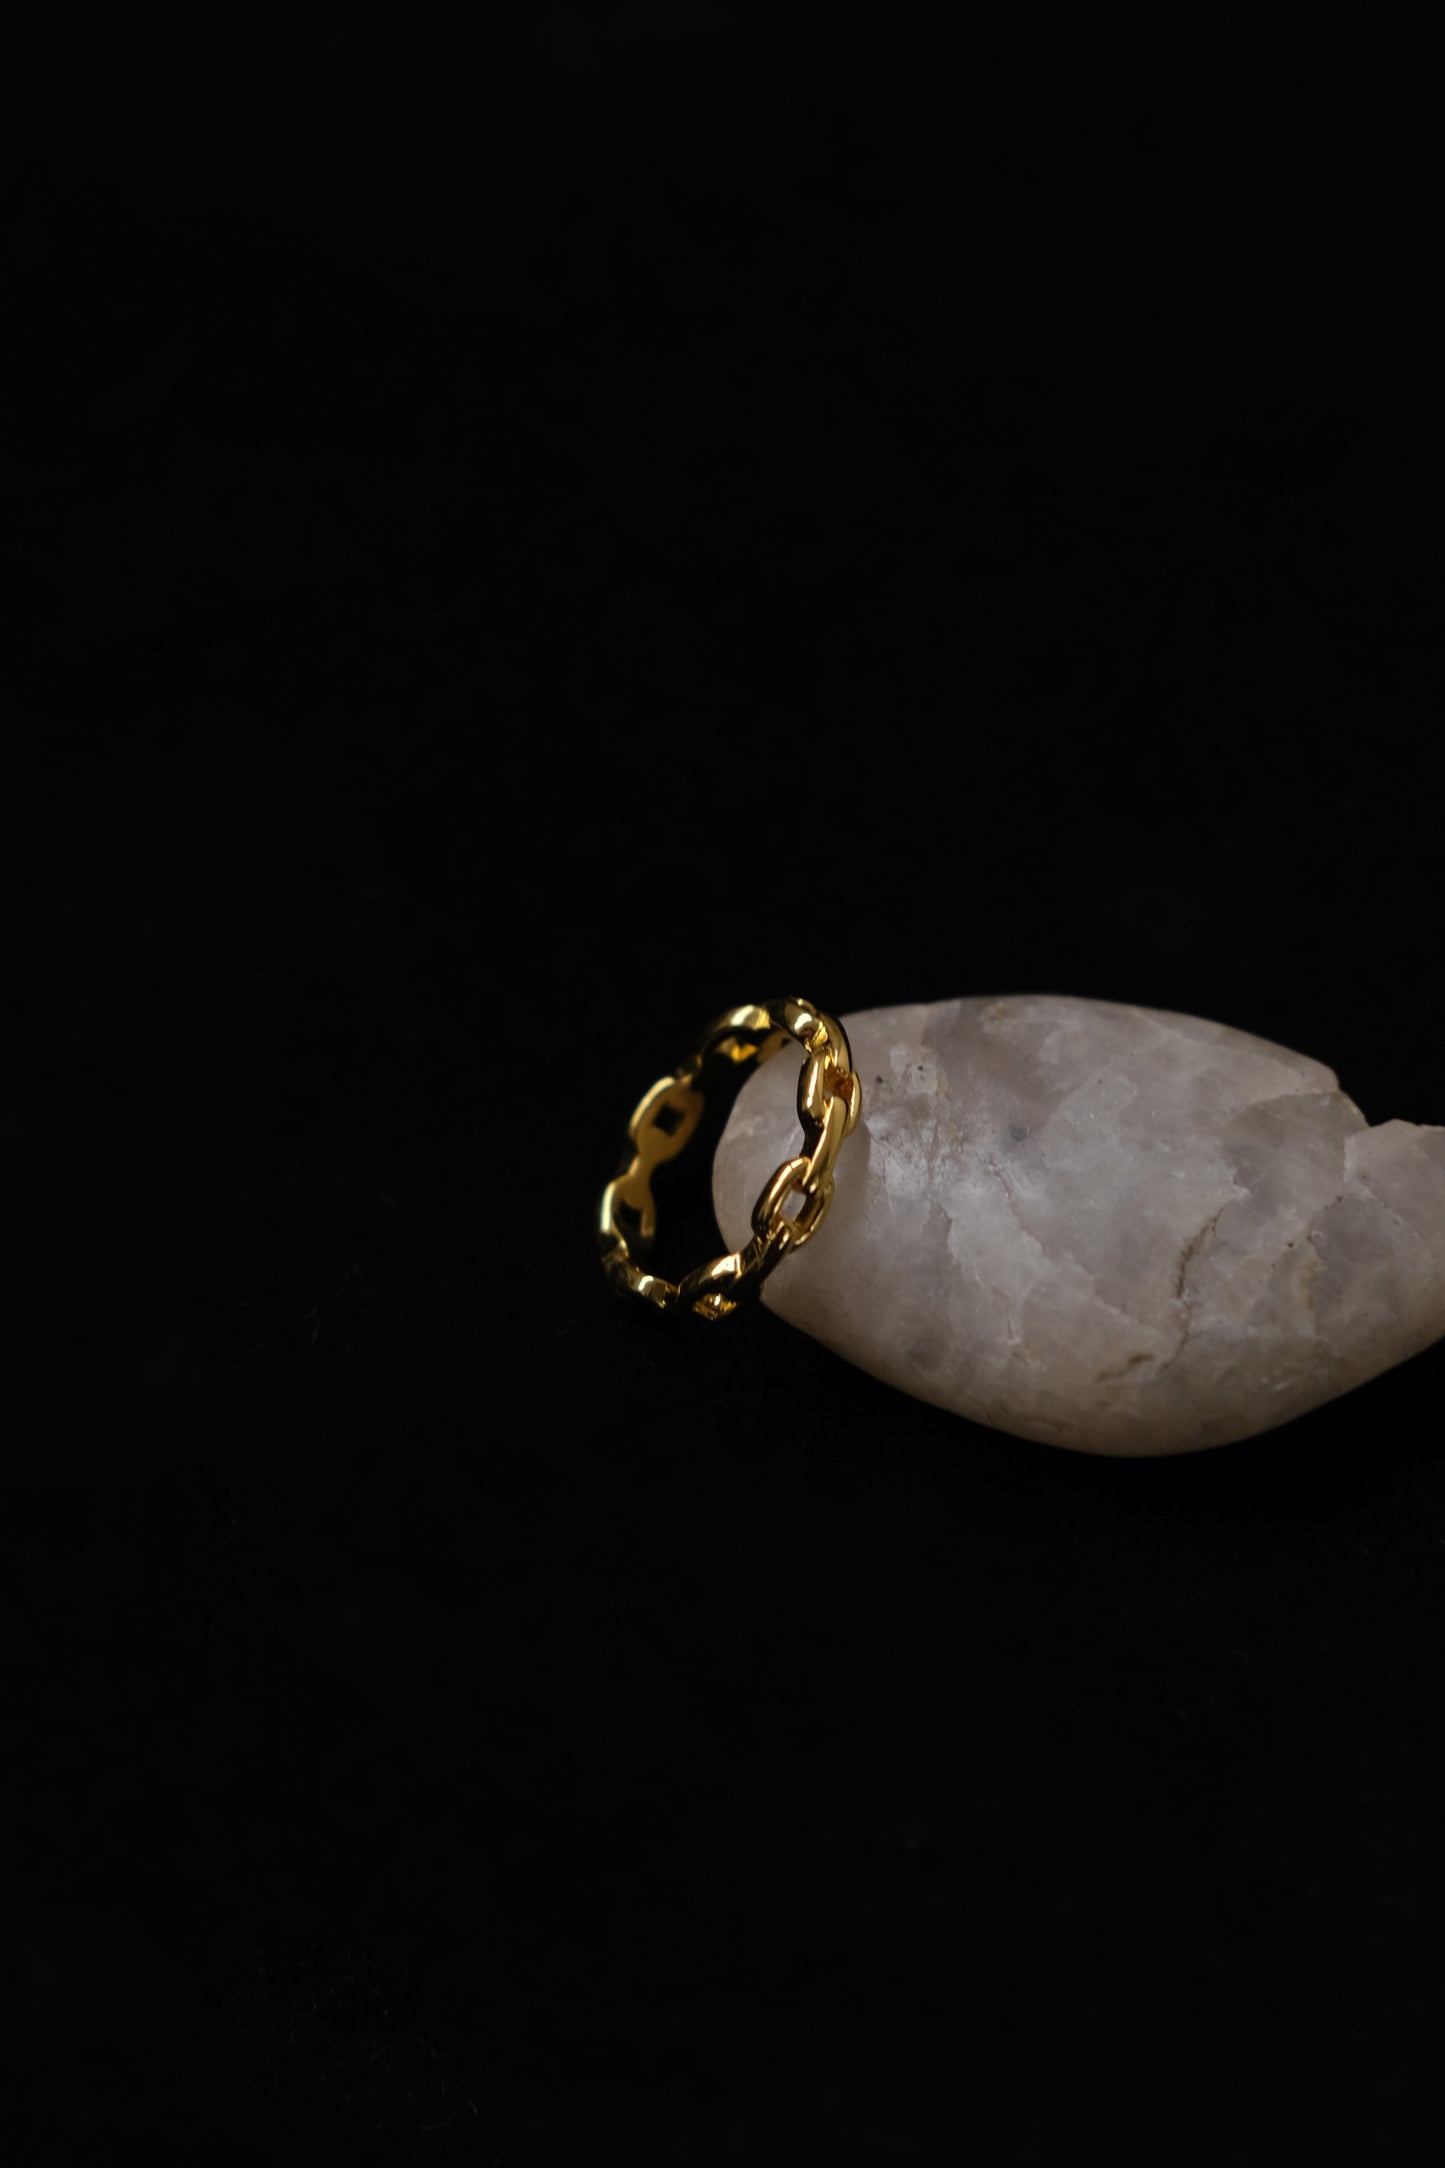 Mini french style chain ring in Gold Vermeil